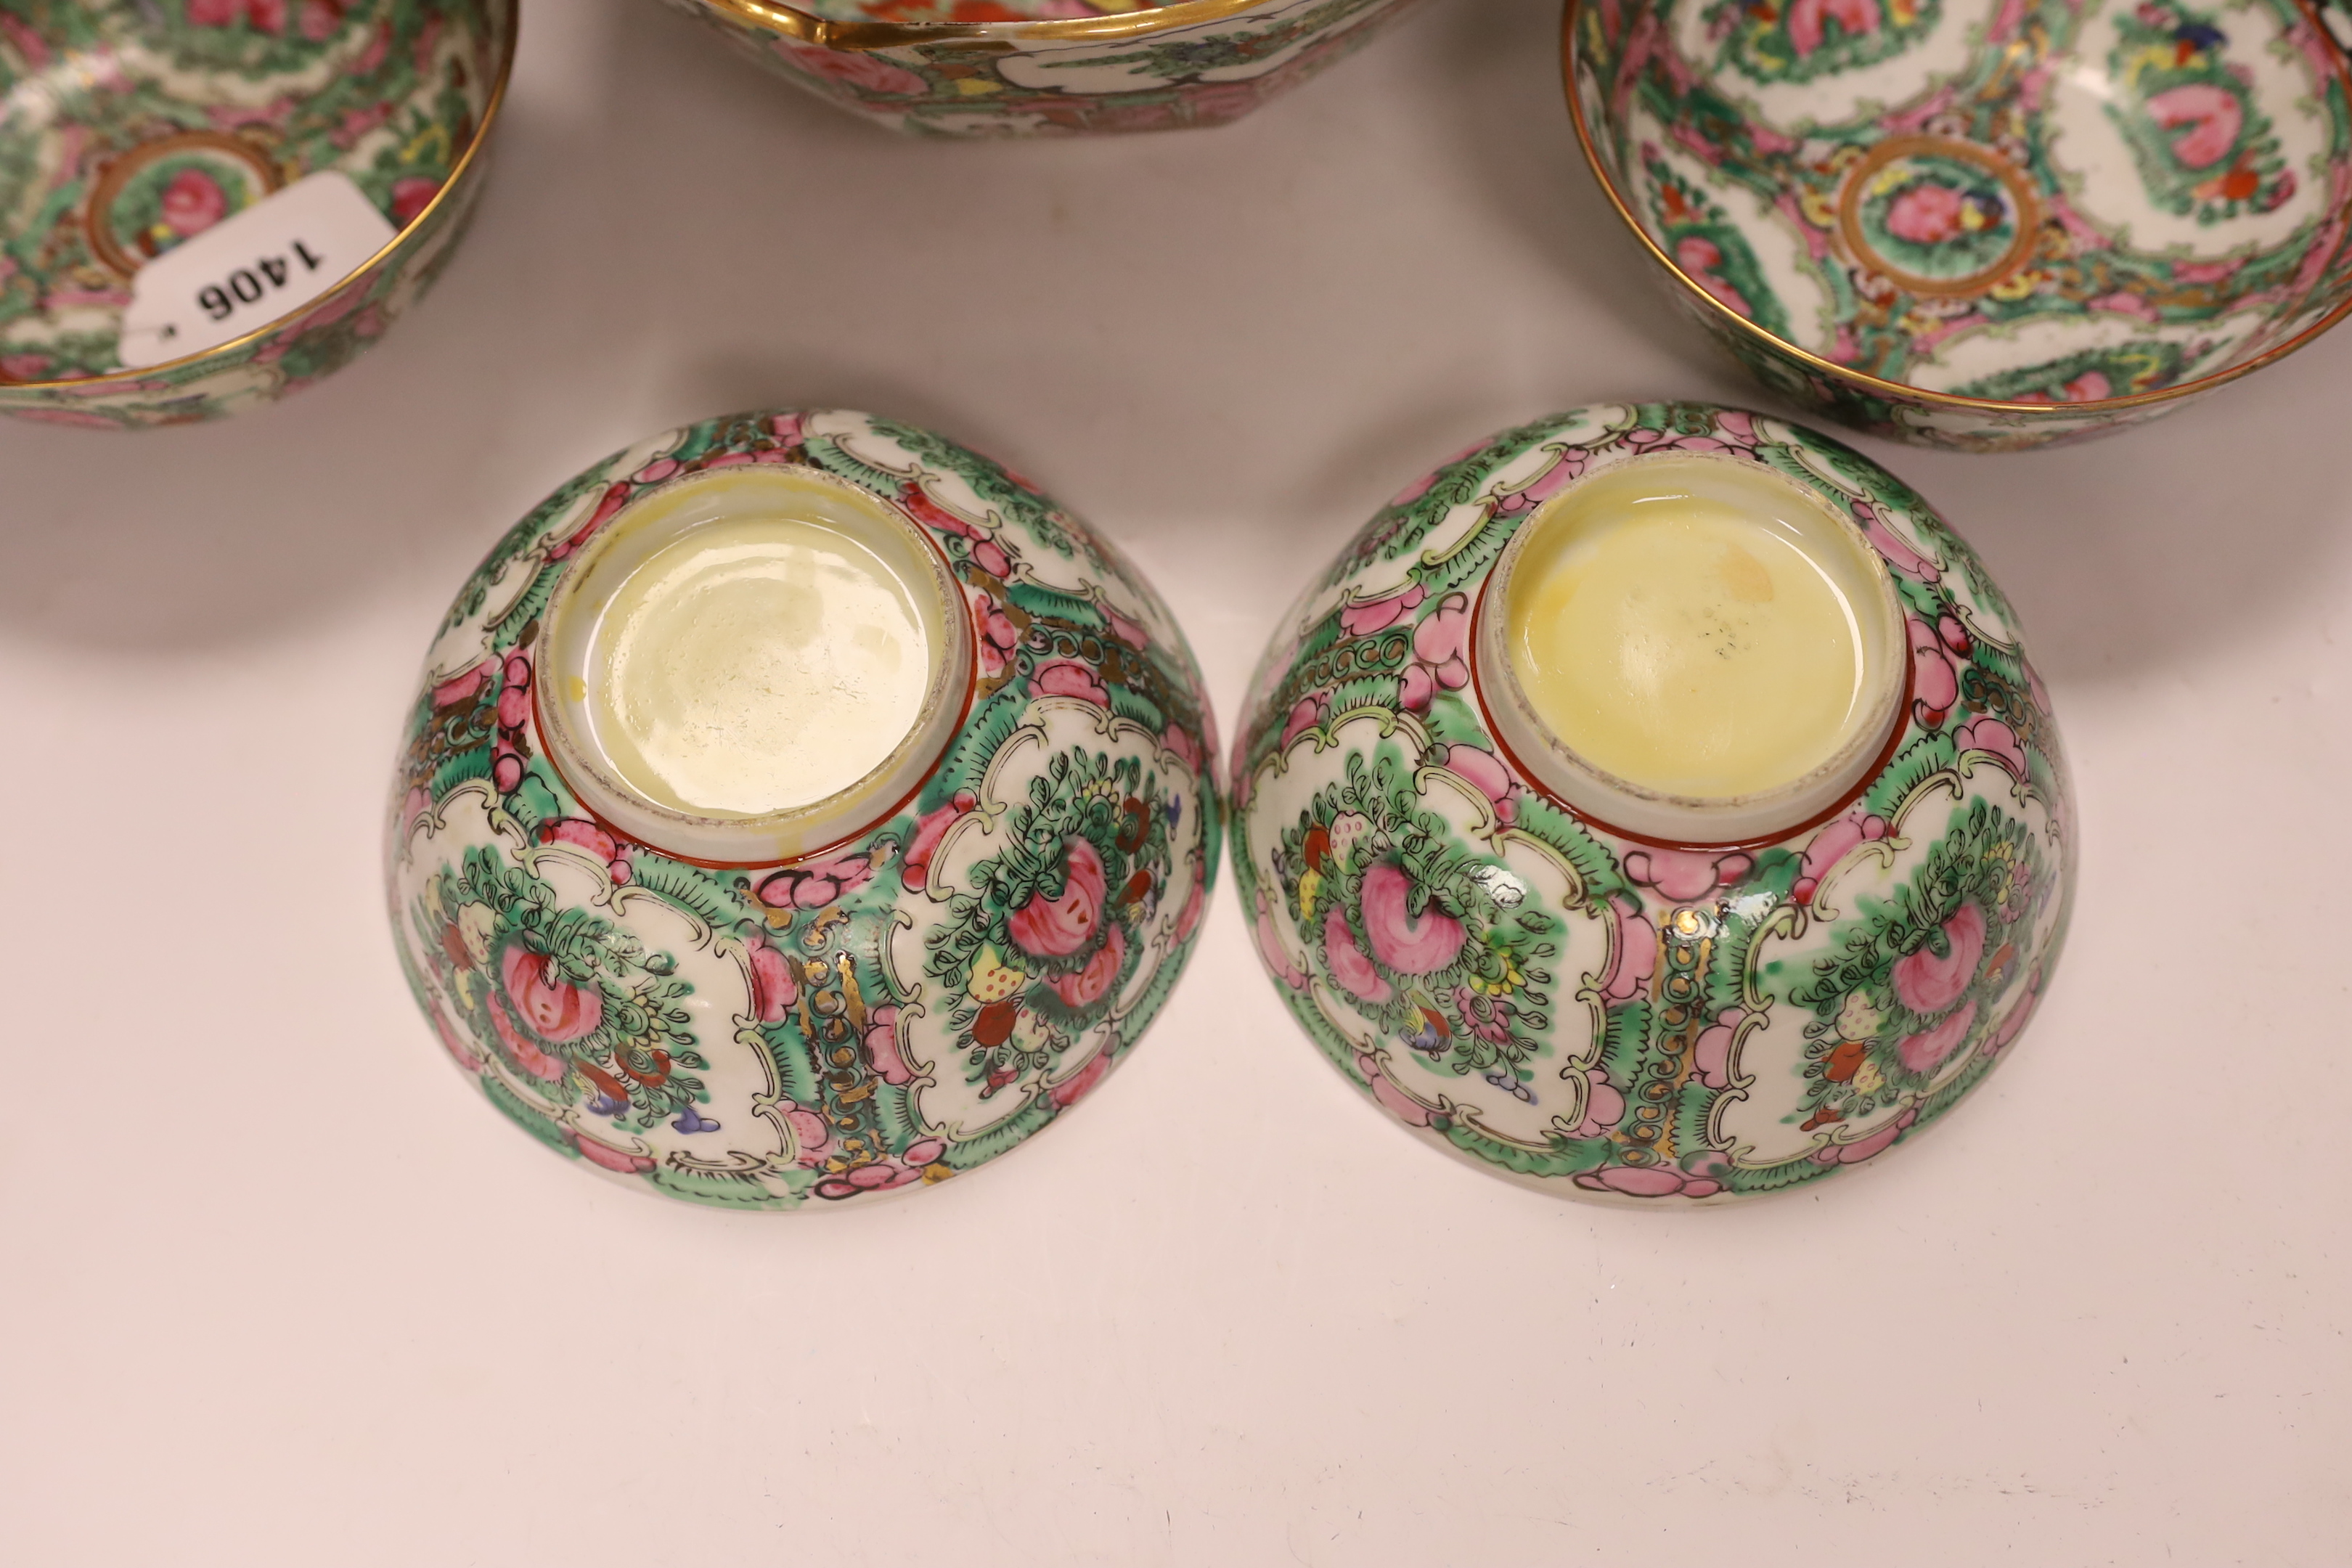 A Chinese famille rose large serving bowl and four smaller bowls, larger bowl 25cm diameter